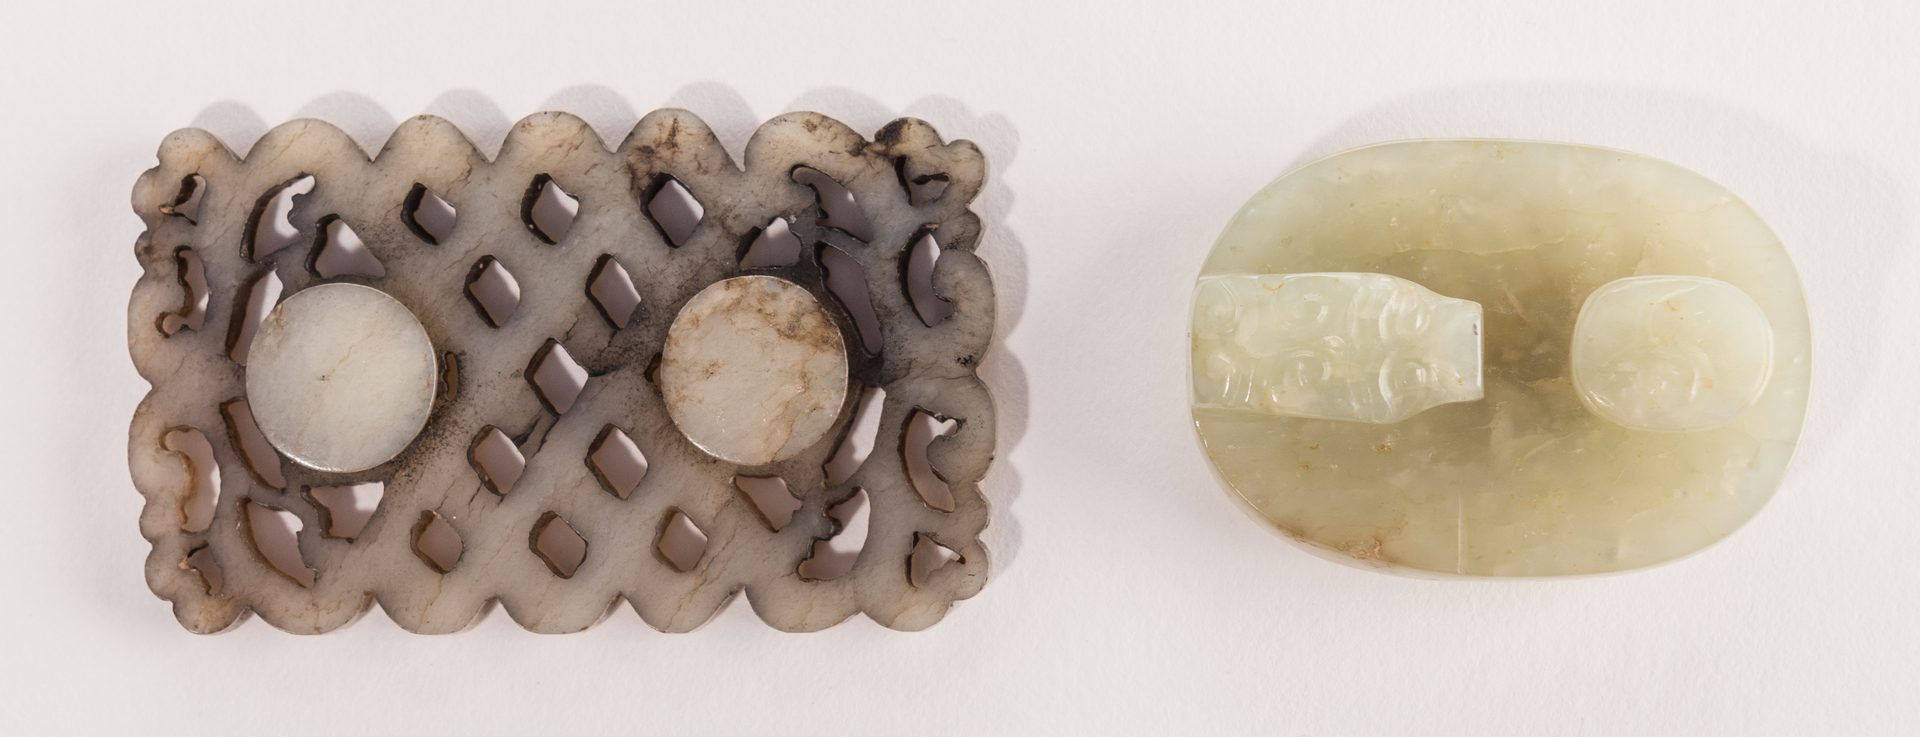 Lot 3: 2 Chinese Carved Jade Belt Ornaments